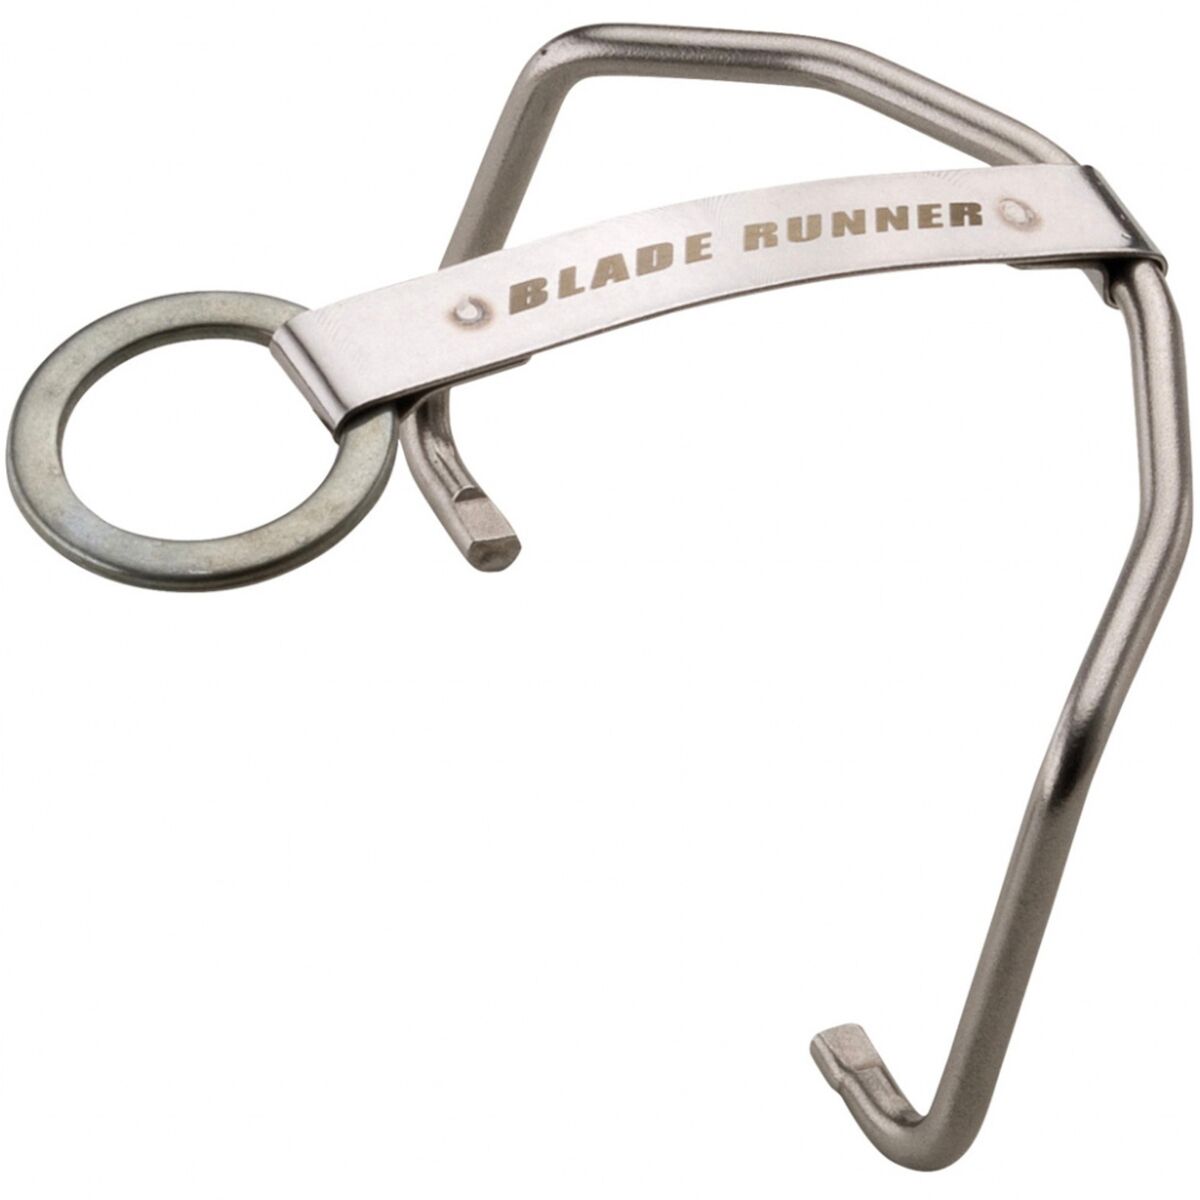 CAMP USA Blade Runner Automatic Toe Bail